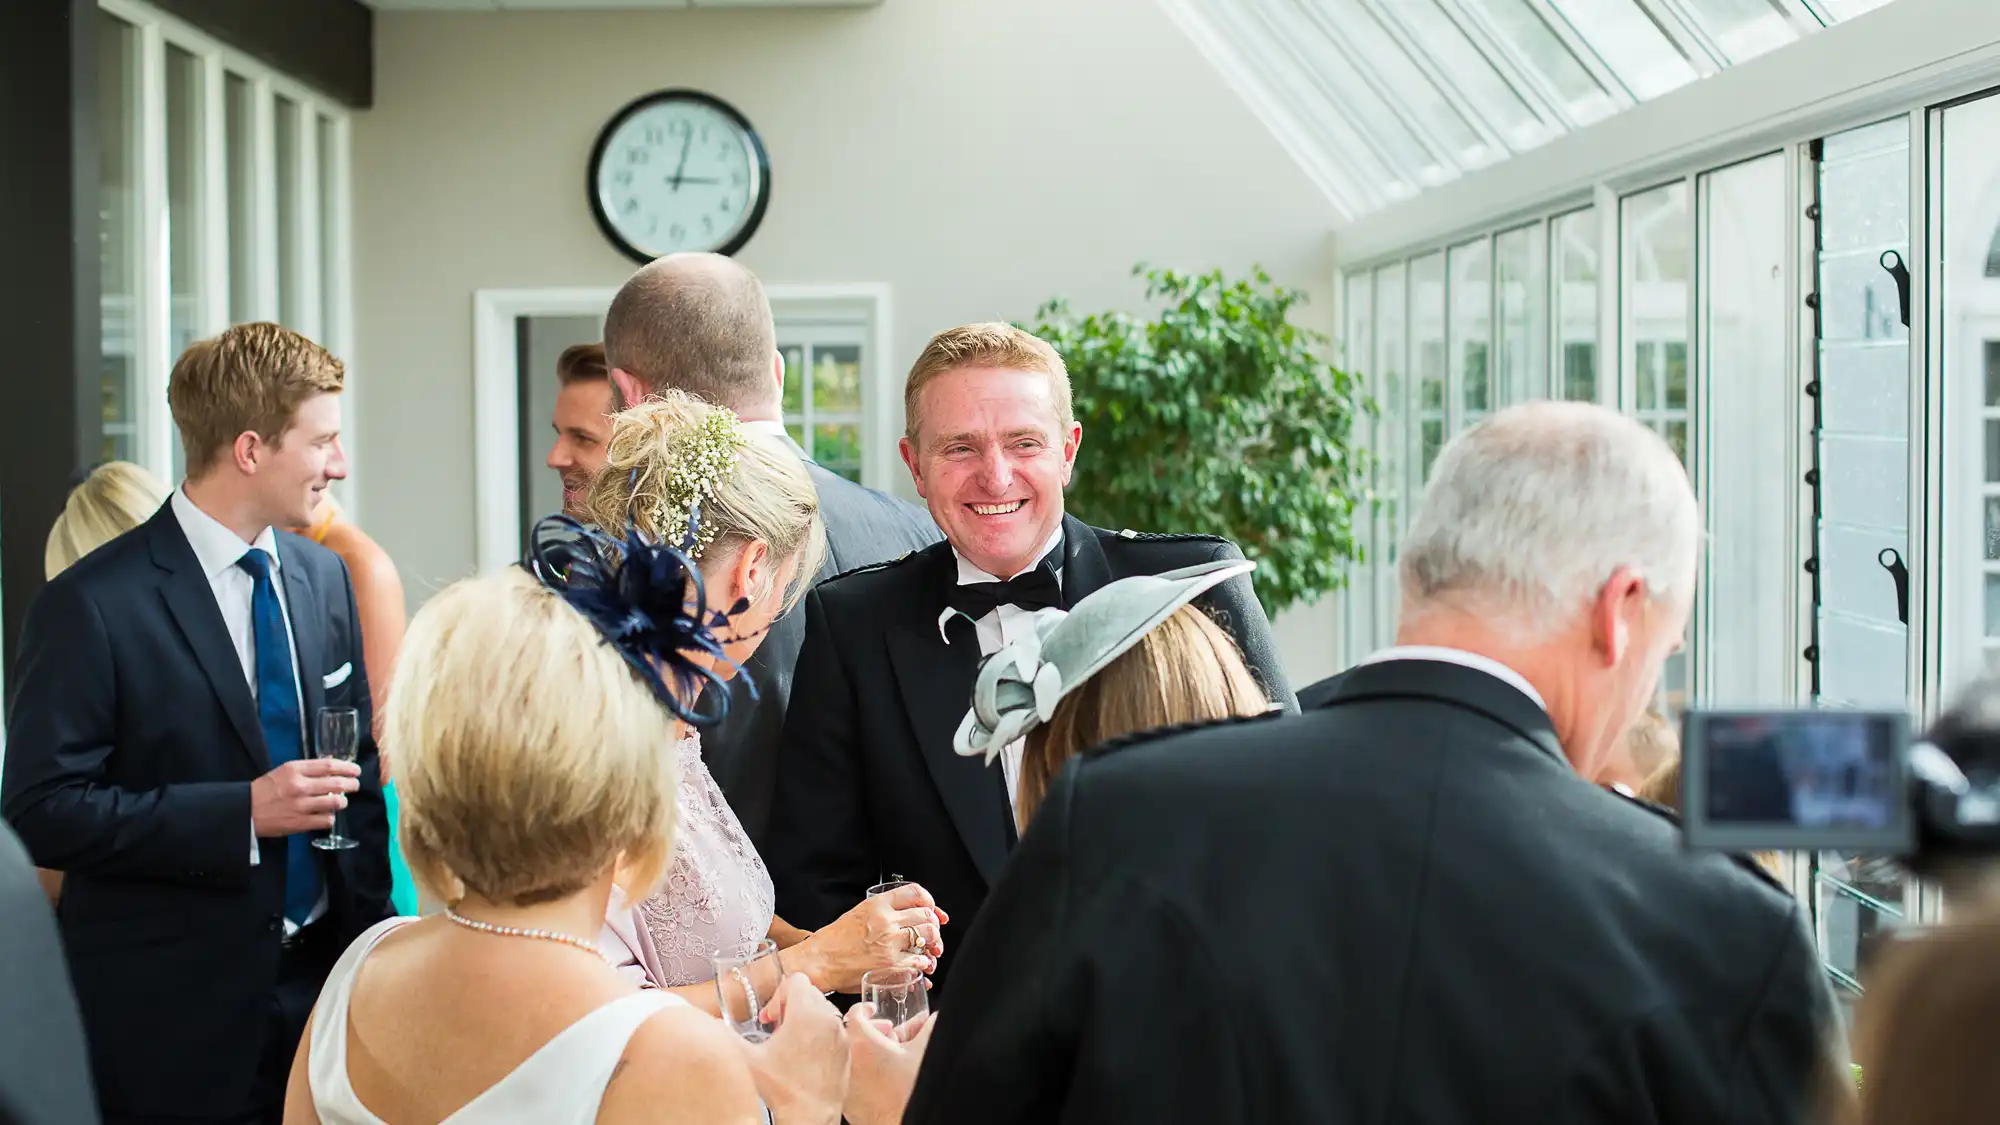 A man smiles at a wedding reception filled with guests, including some wearing fascinators, in a well-lit conservatory-style room.